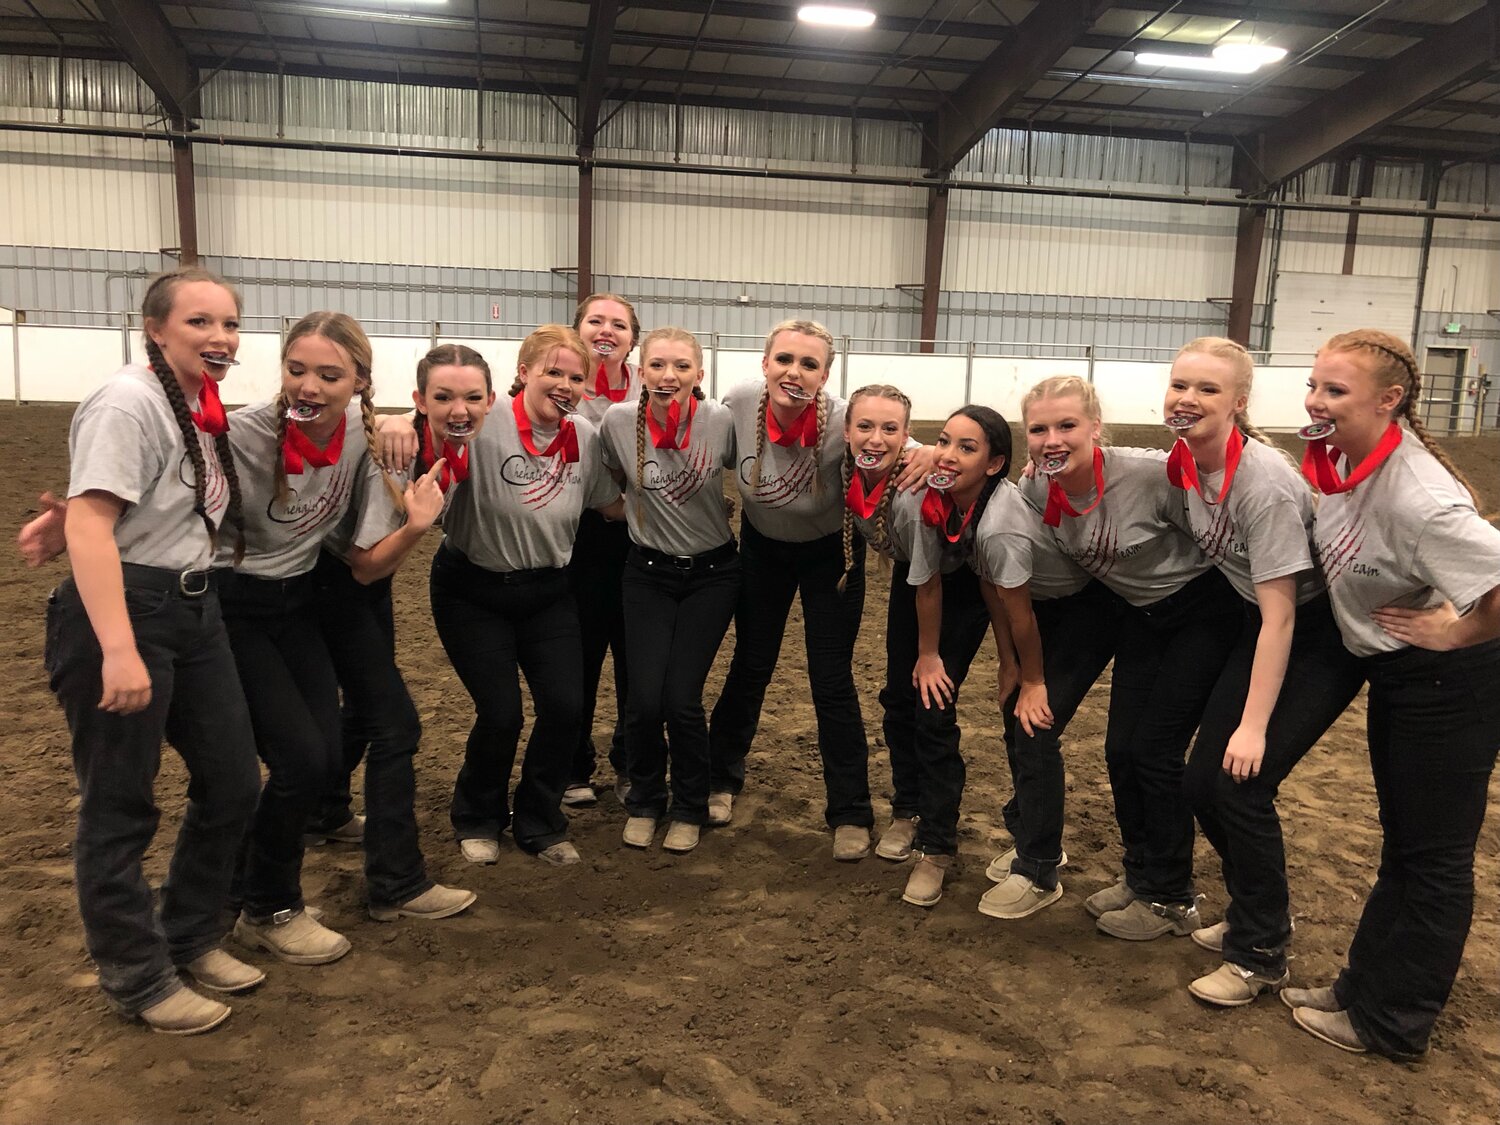 From left, drill team riders Cyndle Haller, Hailee Hellum, Madison Smith, Reagan Olson, Katie Dippo, Shaylie Flanery, Shanelle Mathus, Raylee Anderson, Jeznee Journee, Jaden Hellum and Maizy Samuelson bite down on their second place medals at the state meet in Moses Lake.